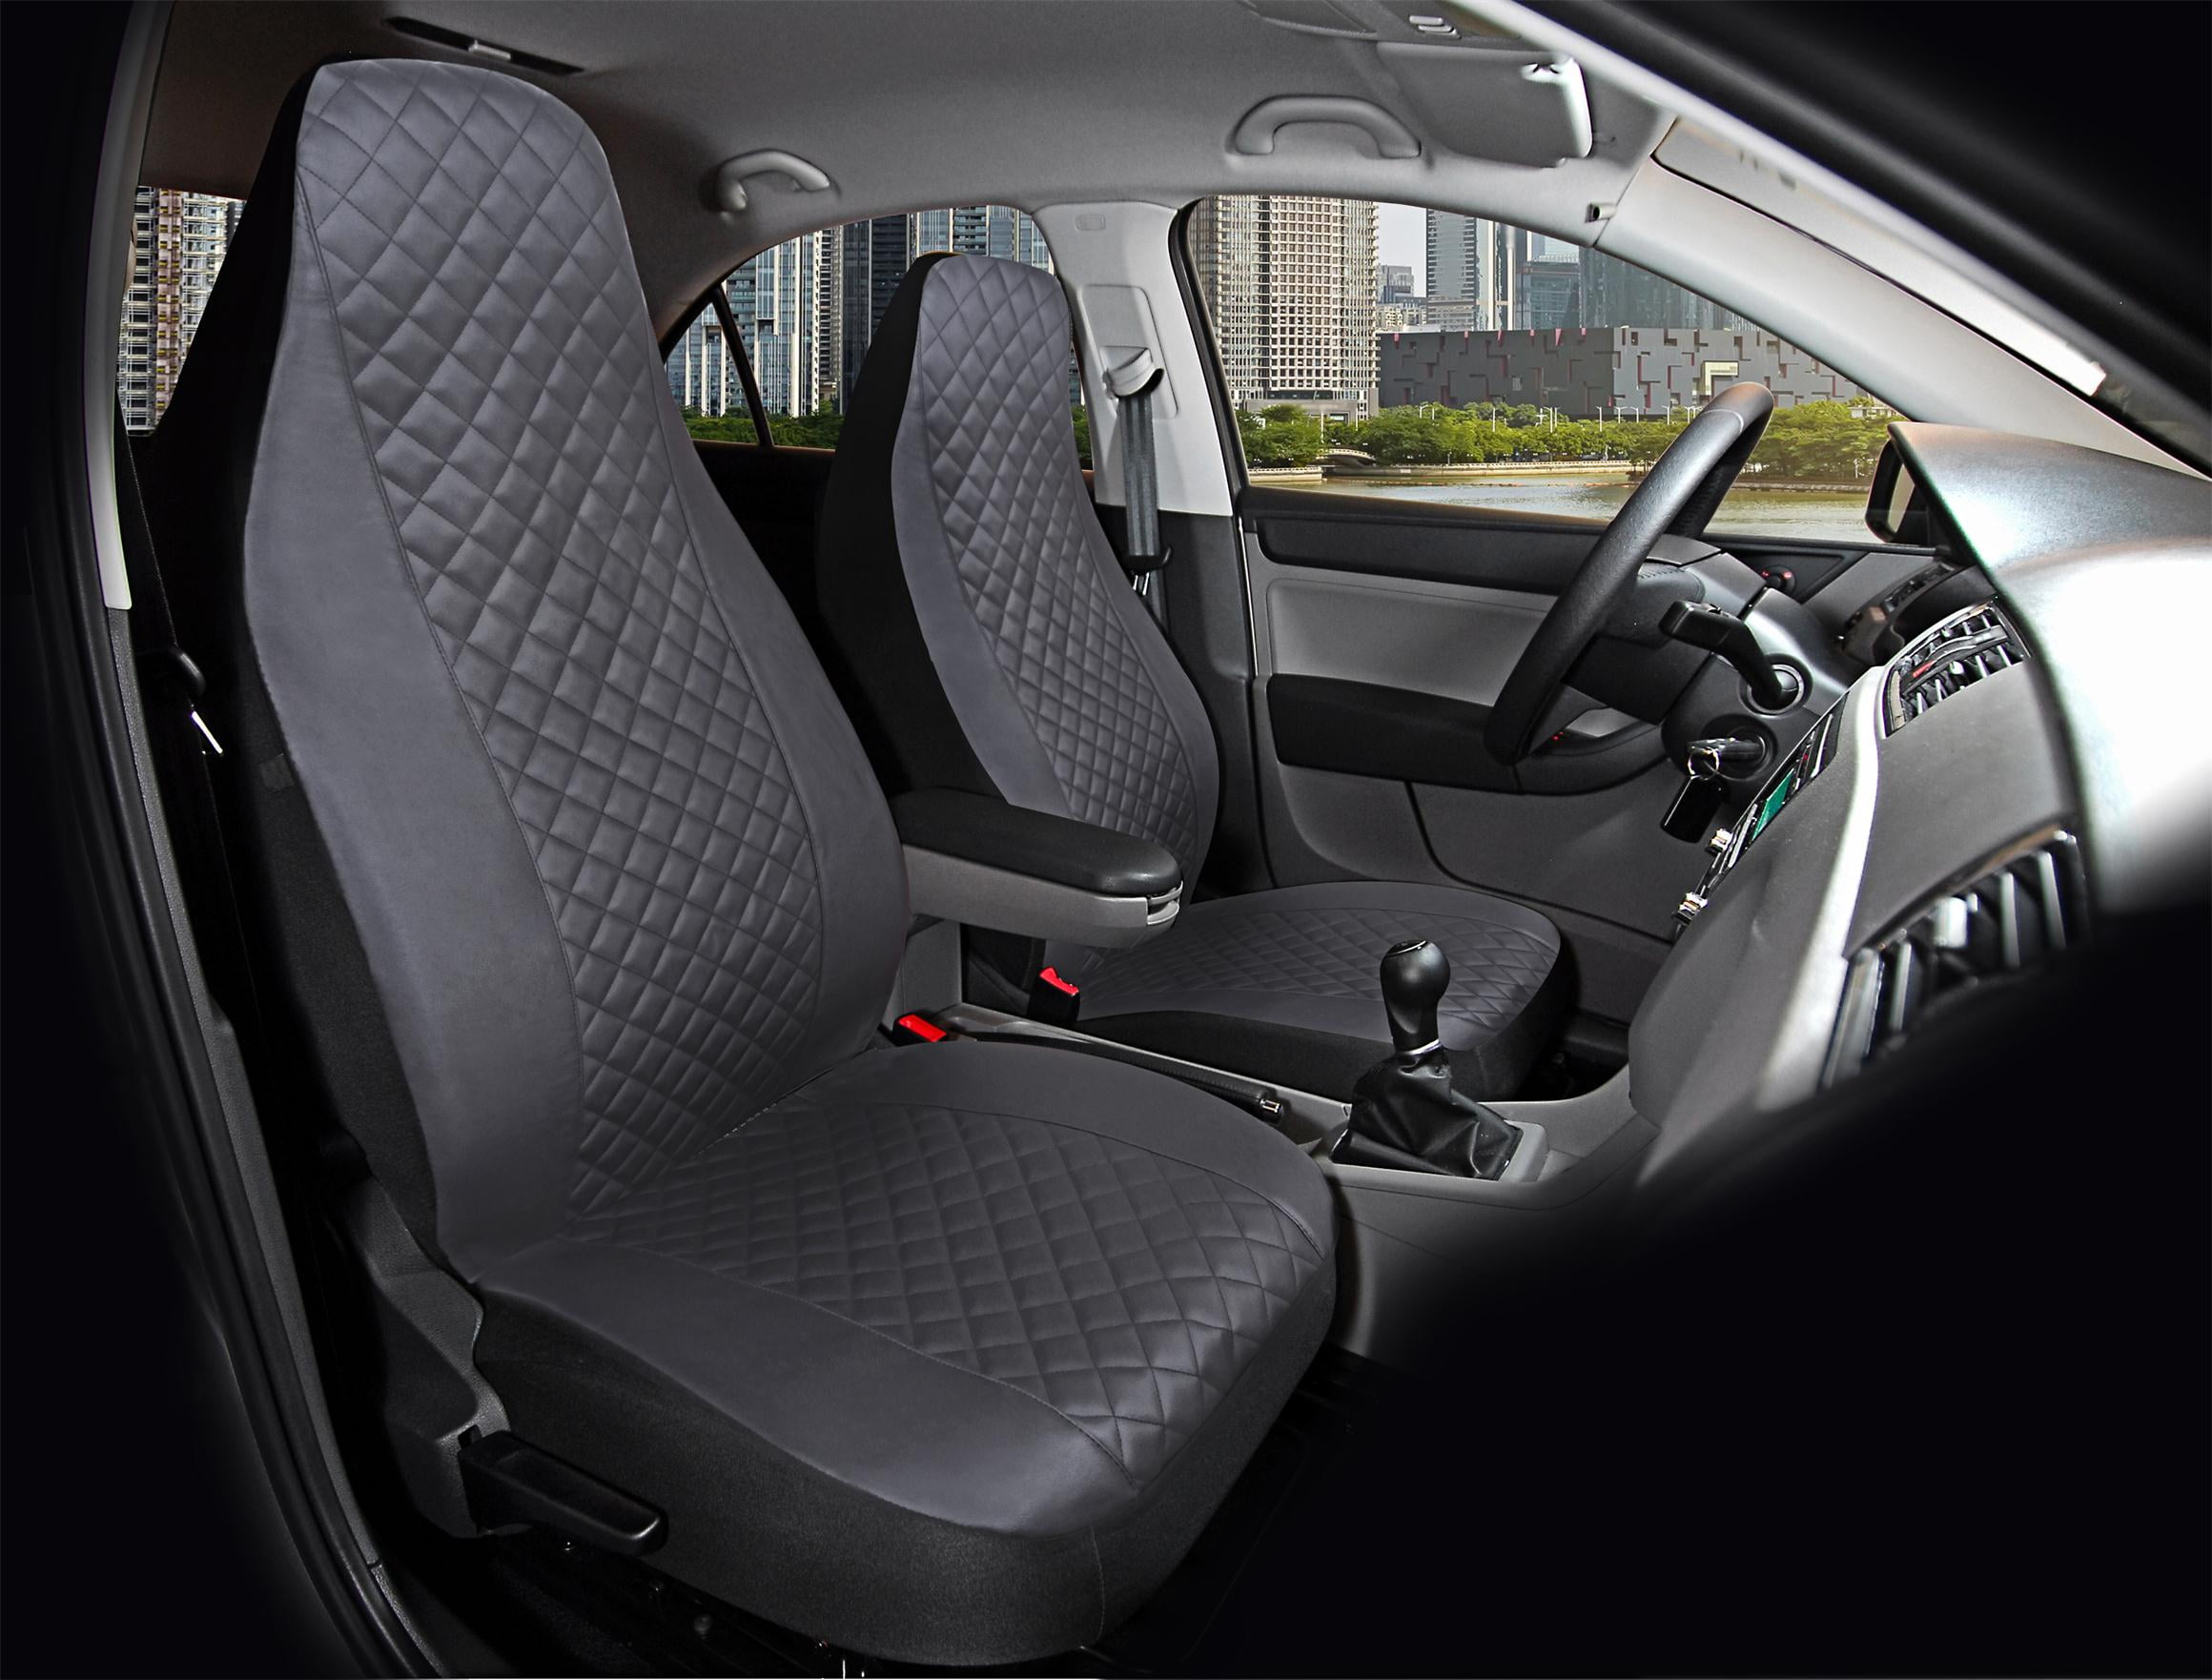 Auto Drive 2PC High Back Quilted Seat Covers PU Leather Black - Universal Fit, SC0985